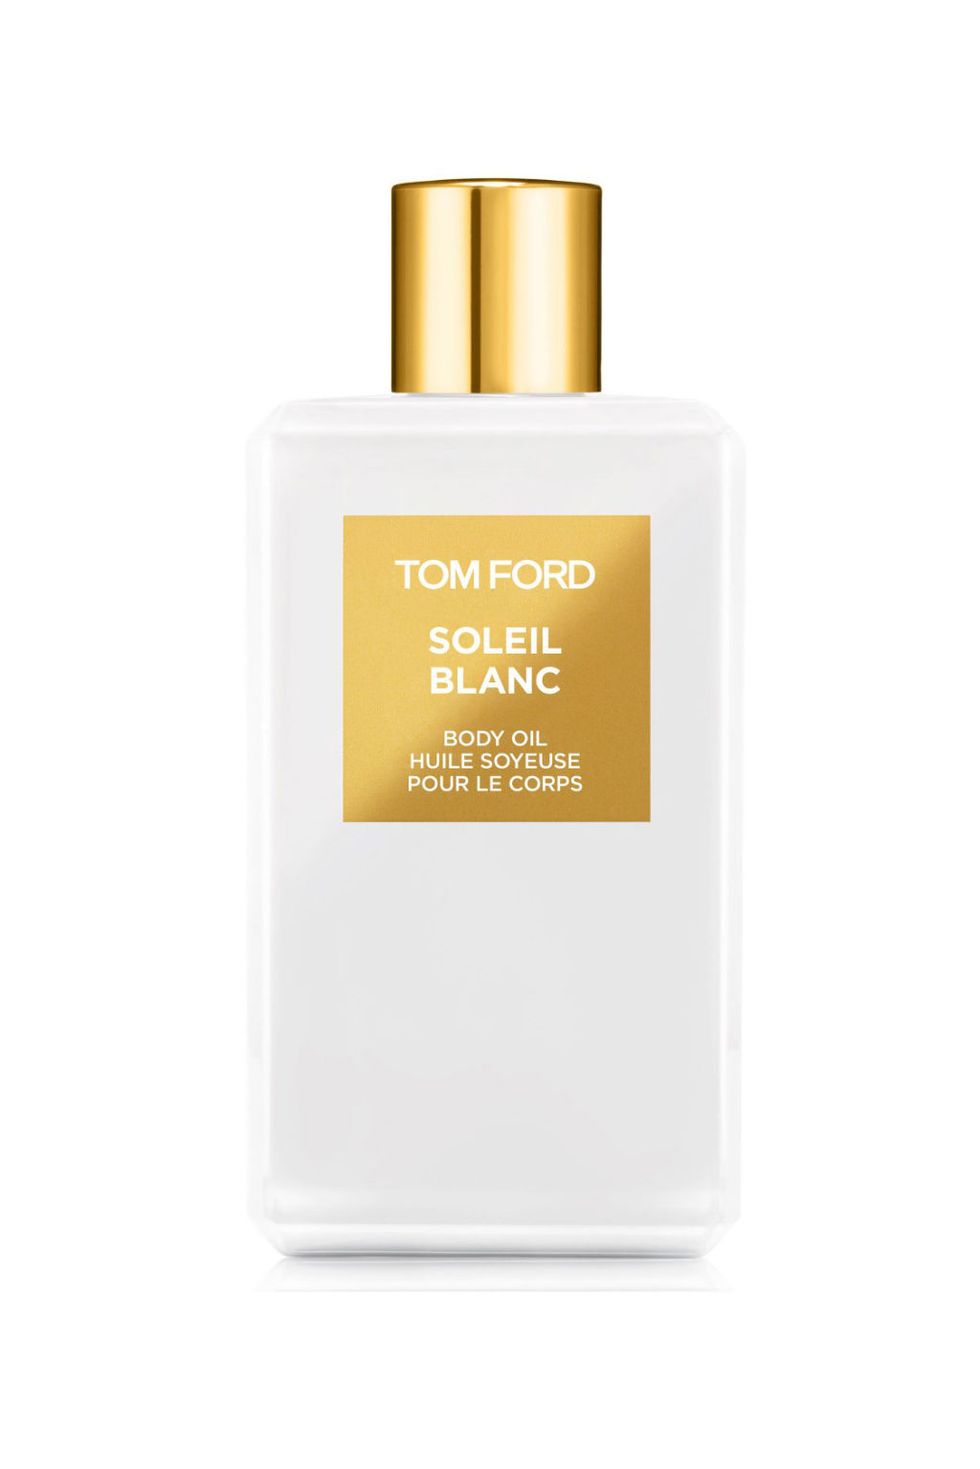 <p>Summery clothes means more skin is on display. A luxe oil adds moisture with the added benefit of long-lasting fragrance.</p><p><em data-redactor-tag="em" data-verified="redactor">Tom Ford Soleil Blanc Body Oil, $72; </em><a href="http://shop.nordstrom.com/s/tom-ford-private-blend-soleil-blanc-body-oil/4600350" target="_blank" data-tracking-id="recirc-text-link"><em data-redactor-tag="em" data-verified="redactor">nordstrom.com</em></a></p>